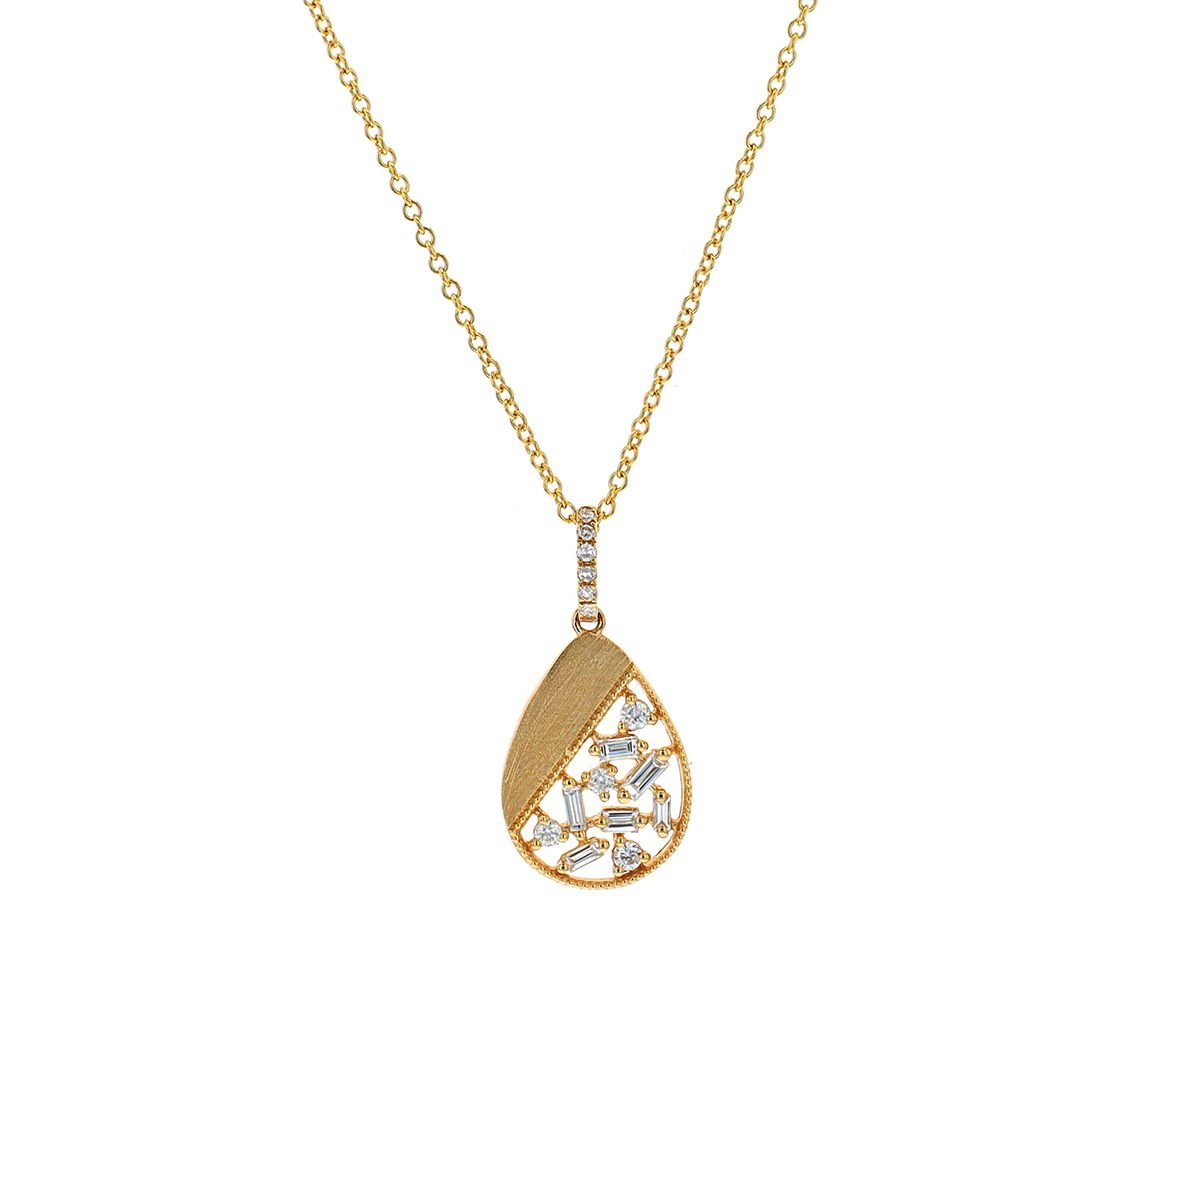 14K Yellow Gold Diamond Pear-Shaped Pendant with Chain